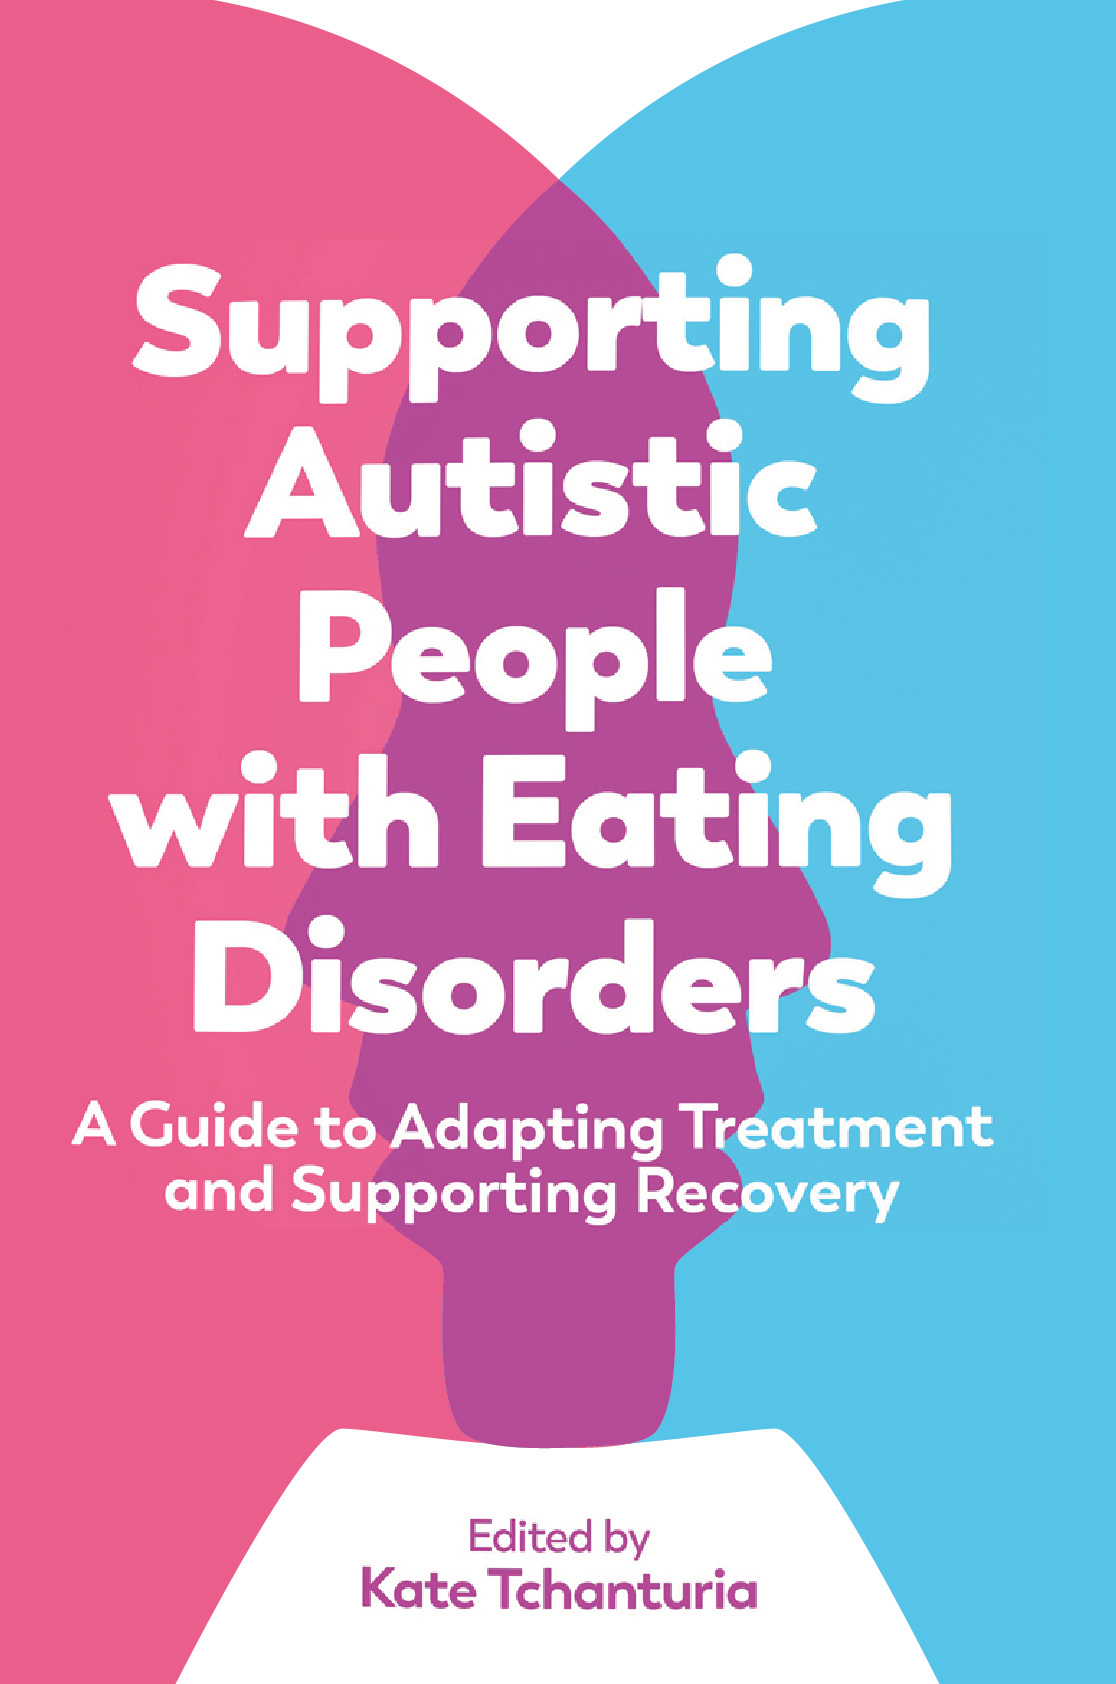 Supporting Autistic People with Eating Disorders - A guide to adapting treatment and supporting recovery